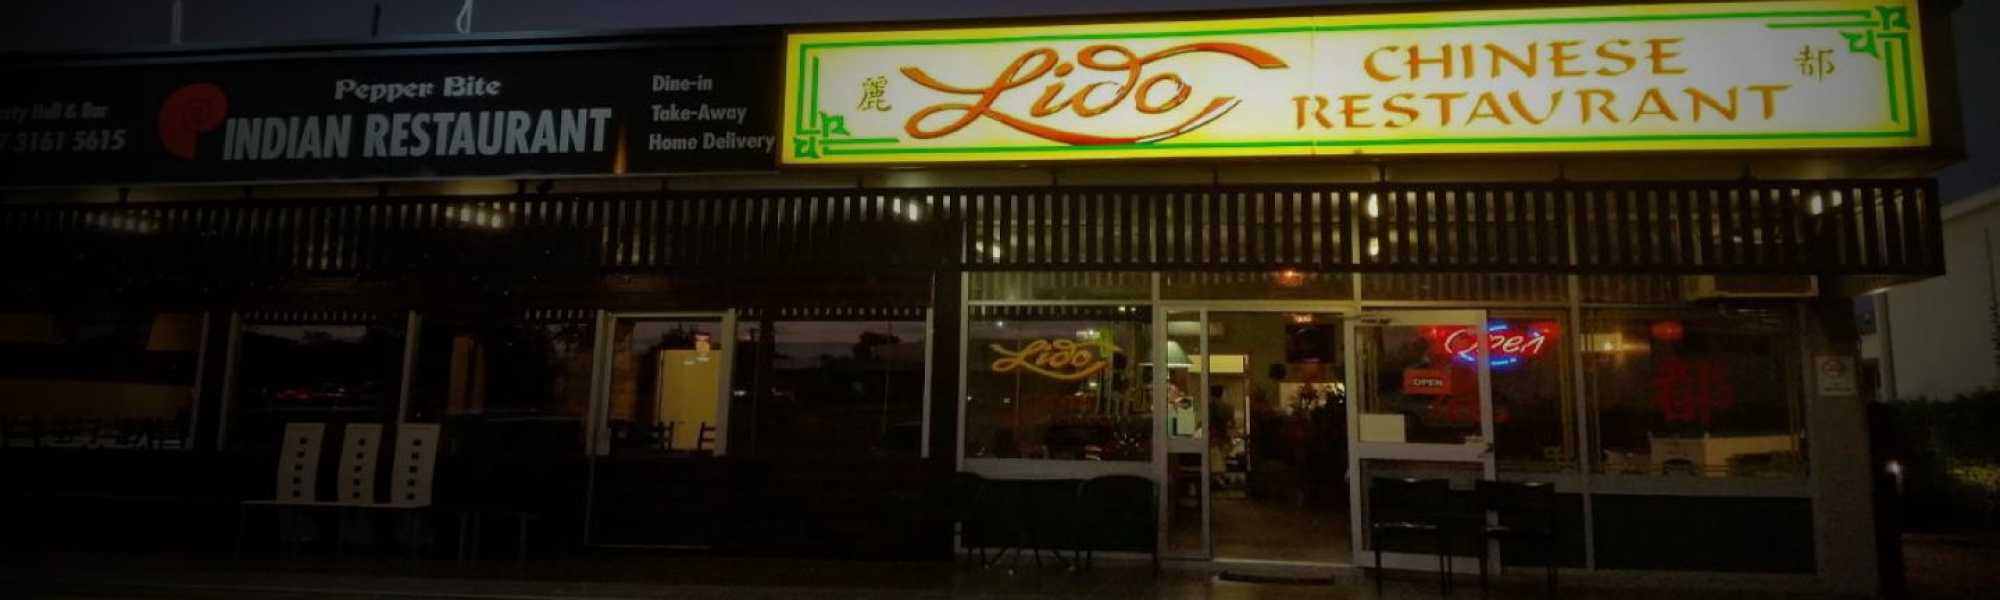 Lido Chinese Restaurant Menu Acacia Ridge Asian Chinese Restaurant Takeaway Lunch Dinner Lido Chinese Restaurant Is A Classic Chinese Cuisine In A Lovely Restaurant With All Your Favourite Traditional Chinese Dishes And